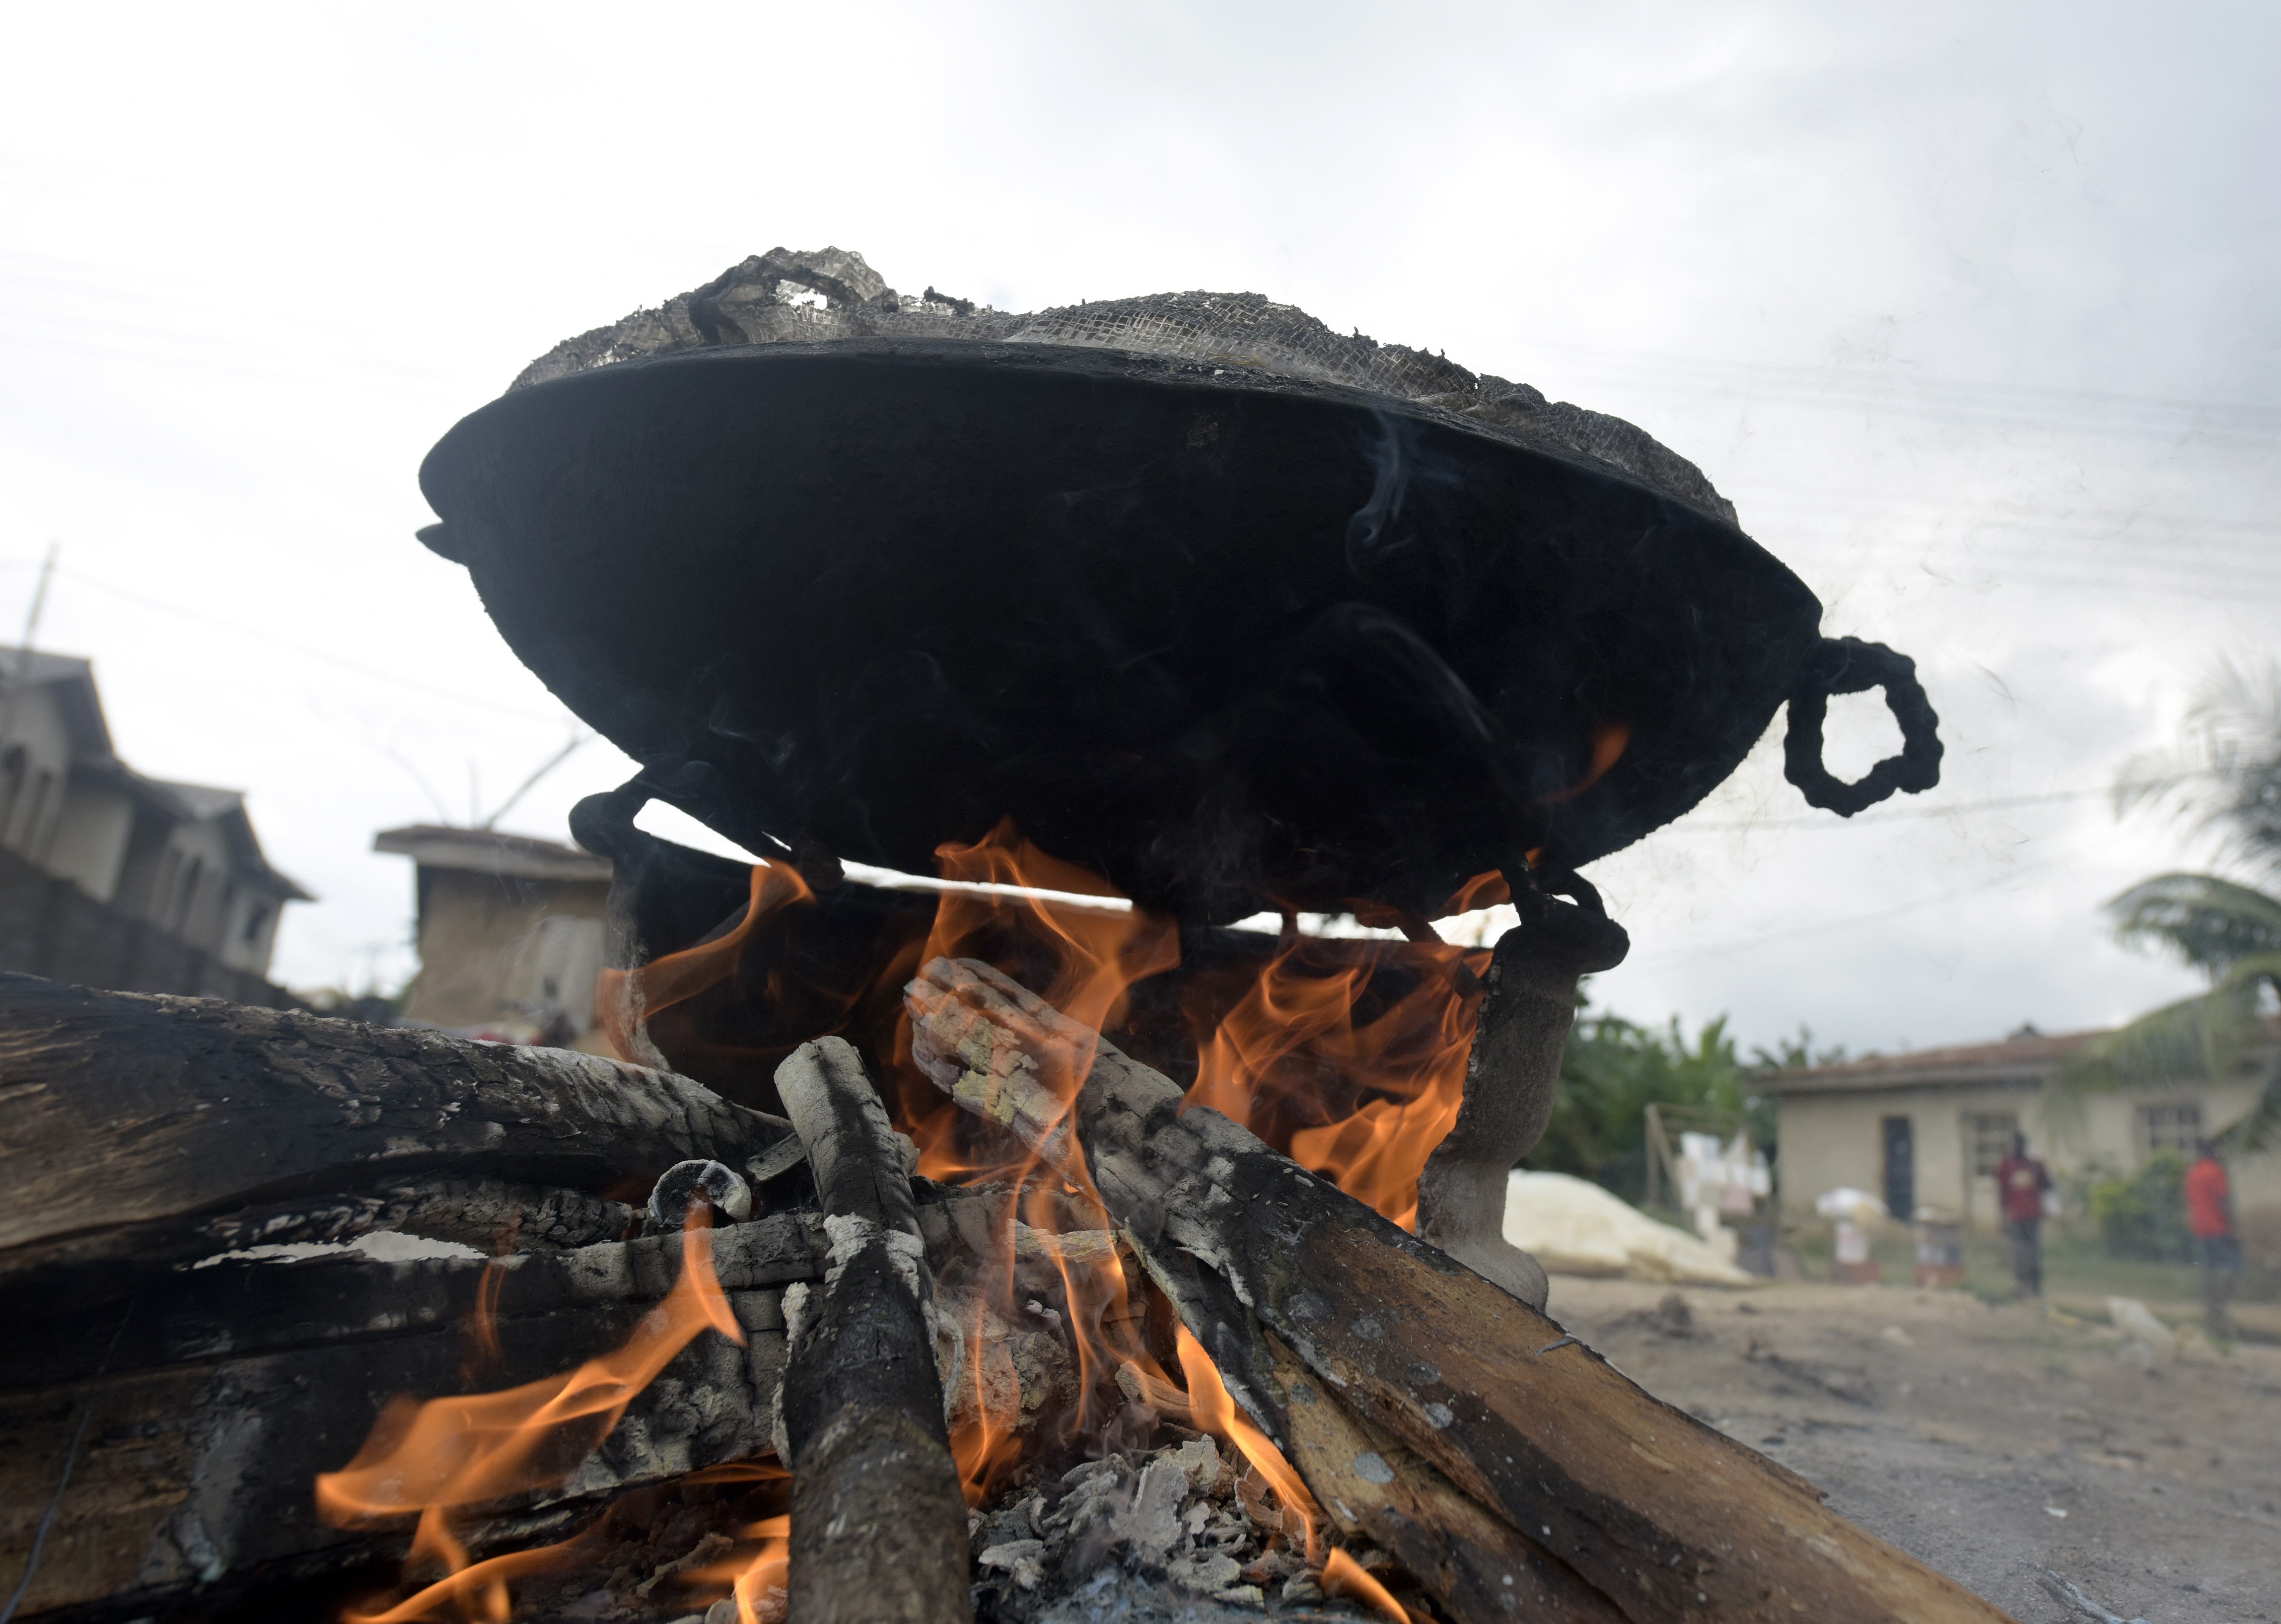 Firewood, seen here on August 22, 2015, is largely used for cooking in sub-Saharan Africa. (Pius Utomi Ekepi—Getty Images)